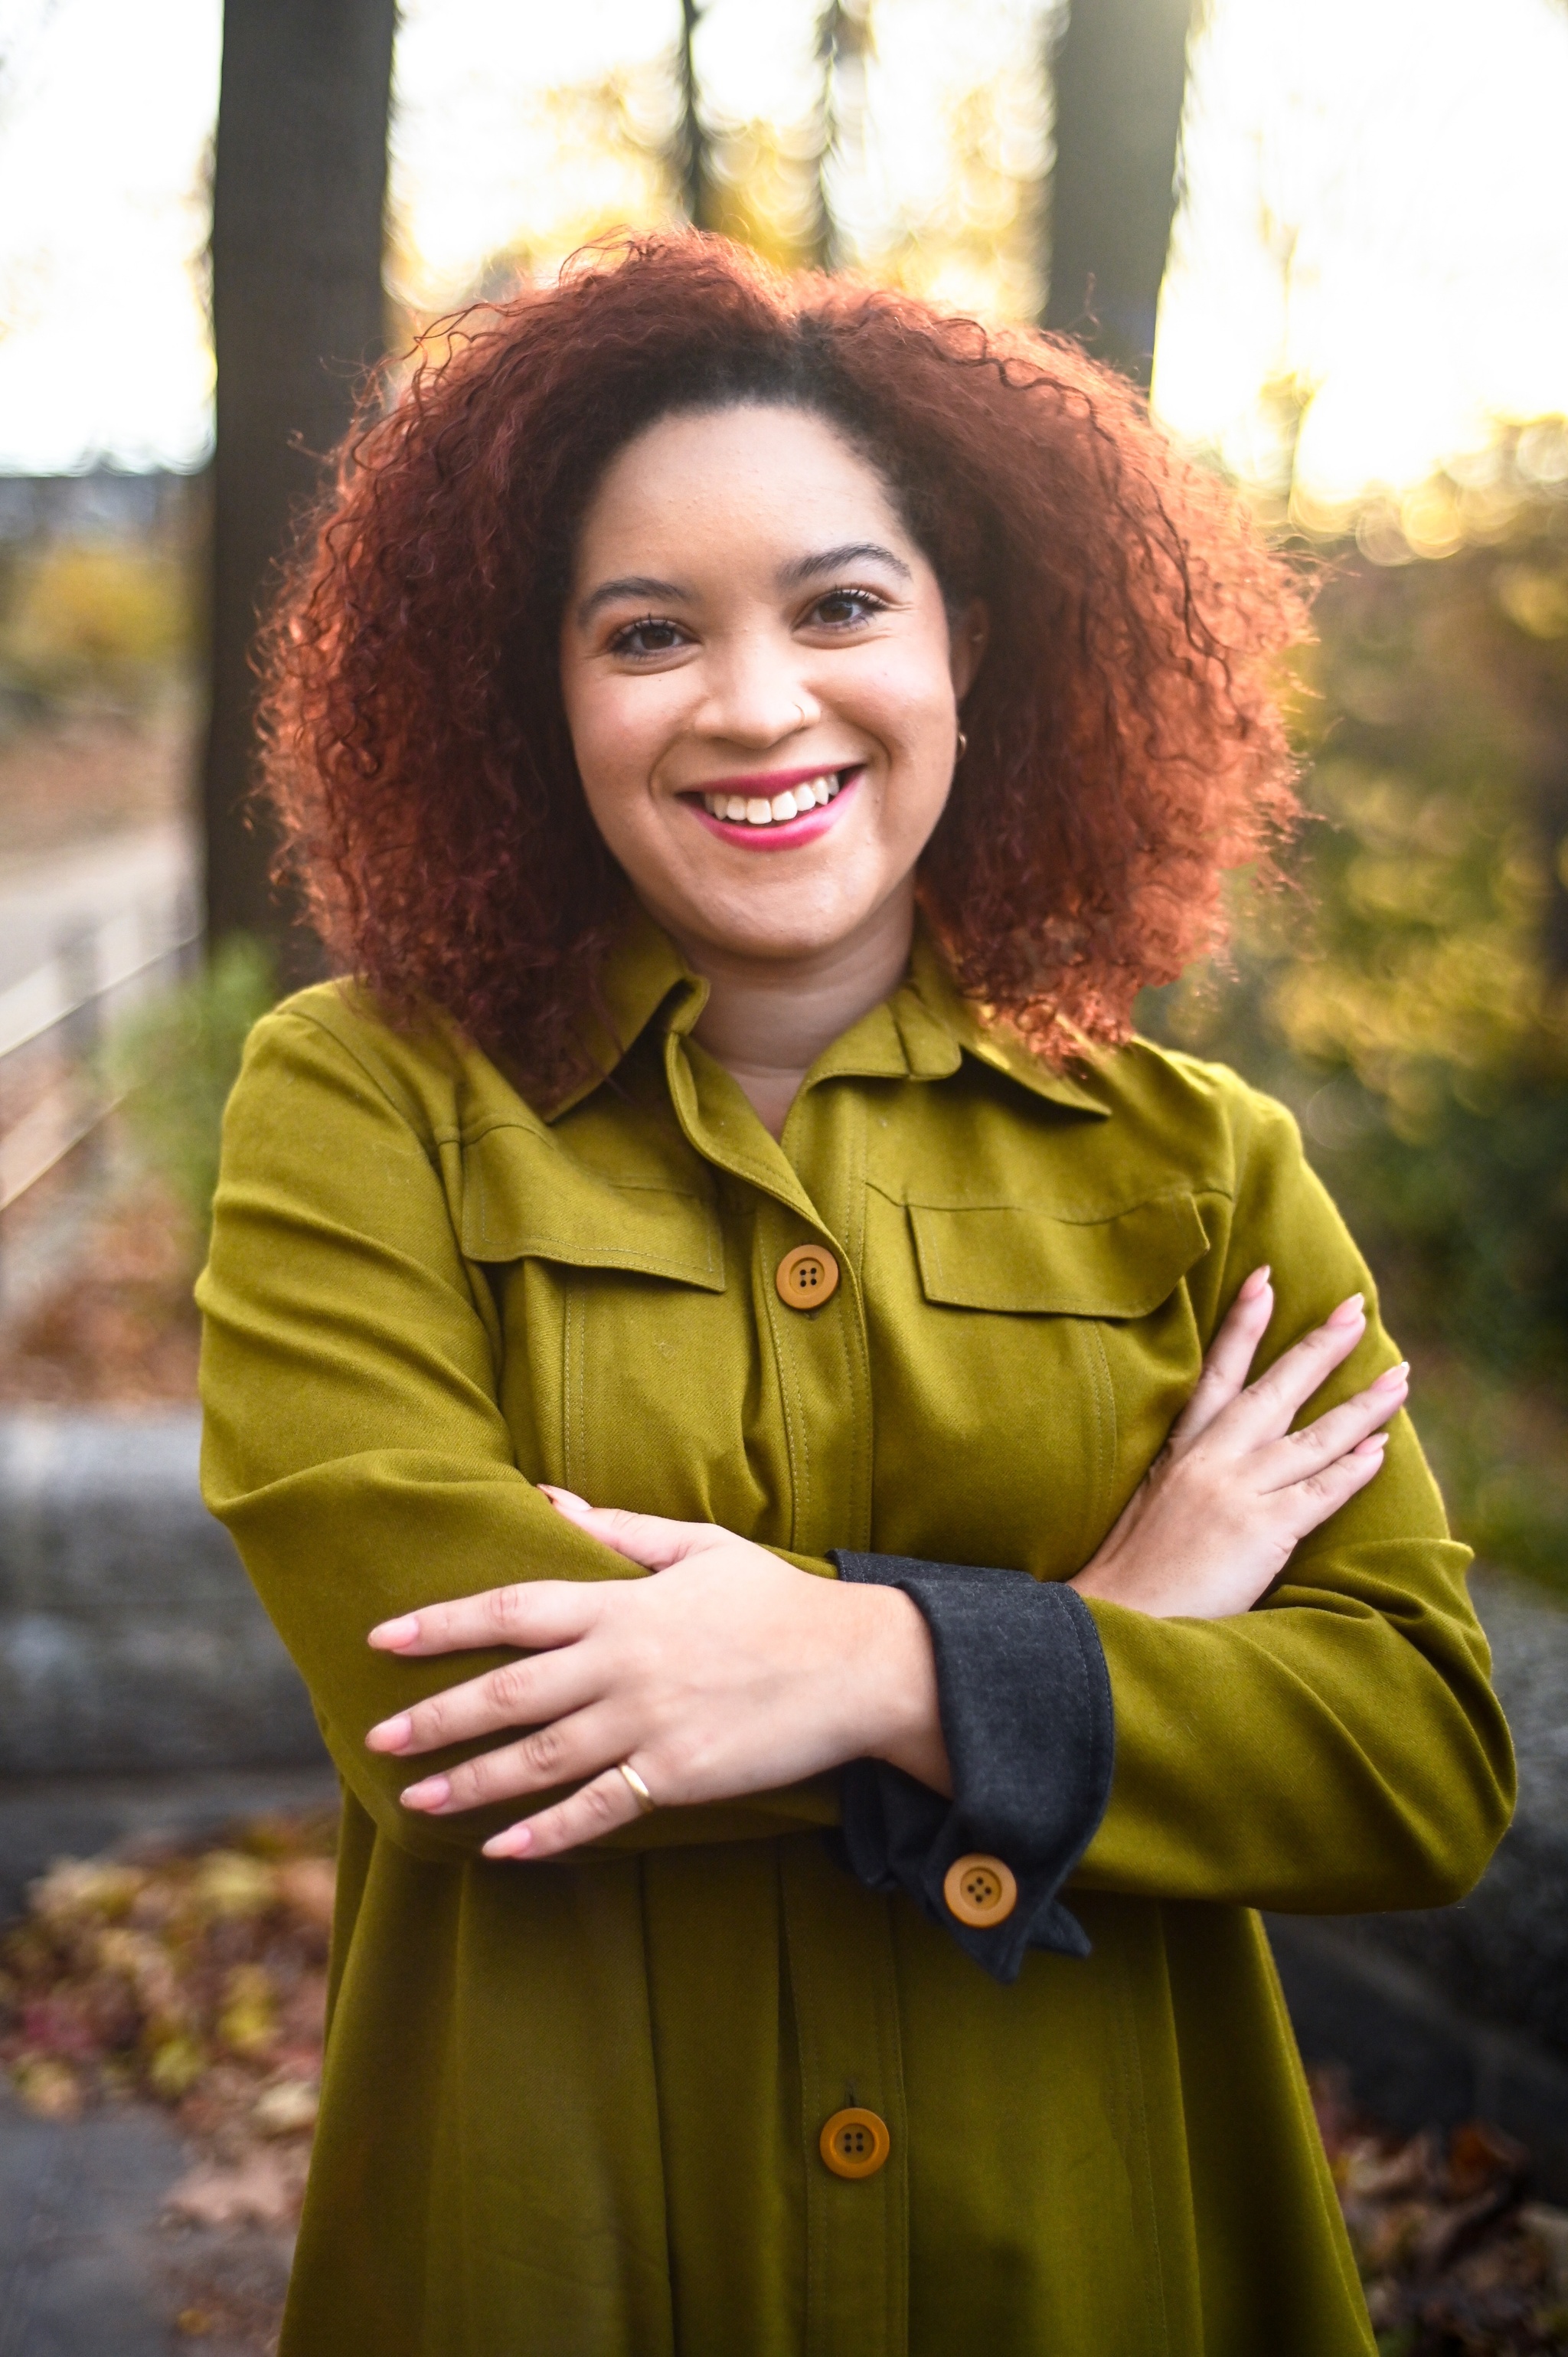 A portrait of Adeze Wilford, a Black woman with light skin and auburn hair who poses smiling with her arms crossed across her chest. Adeze is outdoors with trees and foliage behind her. She wears a green dress that fades from lighter to darker green.